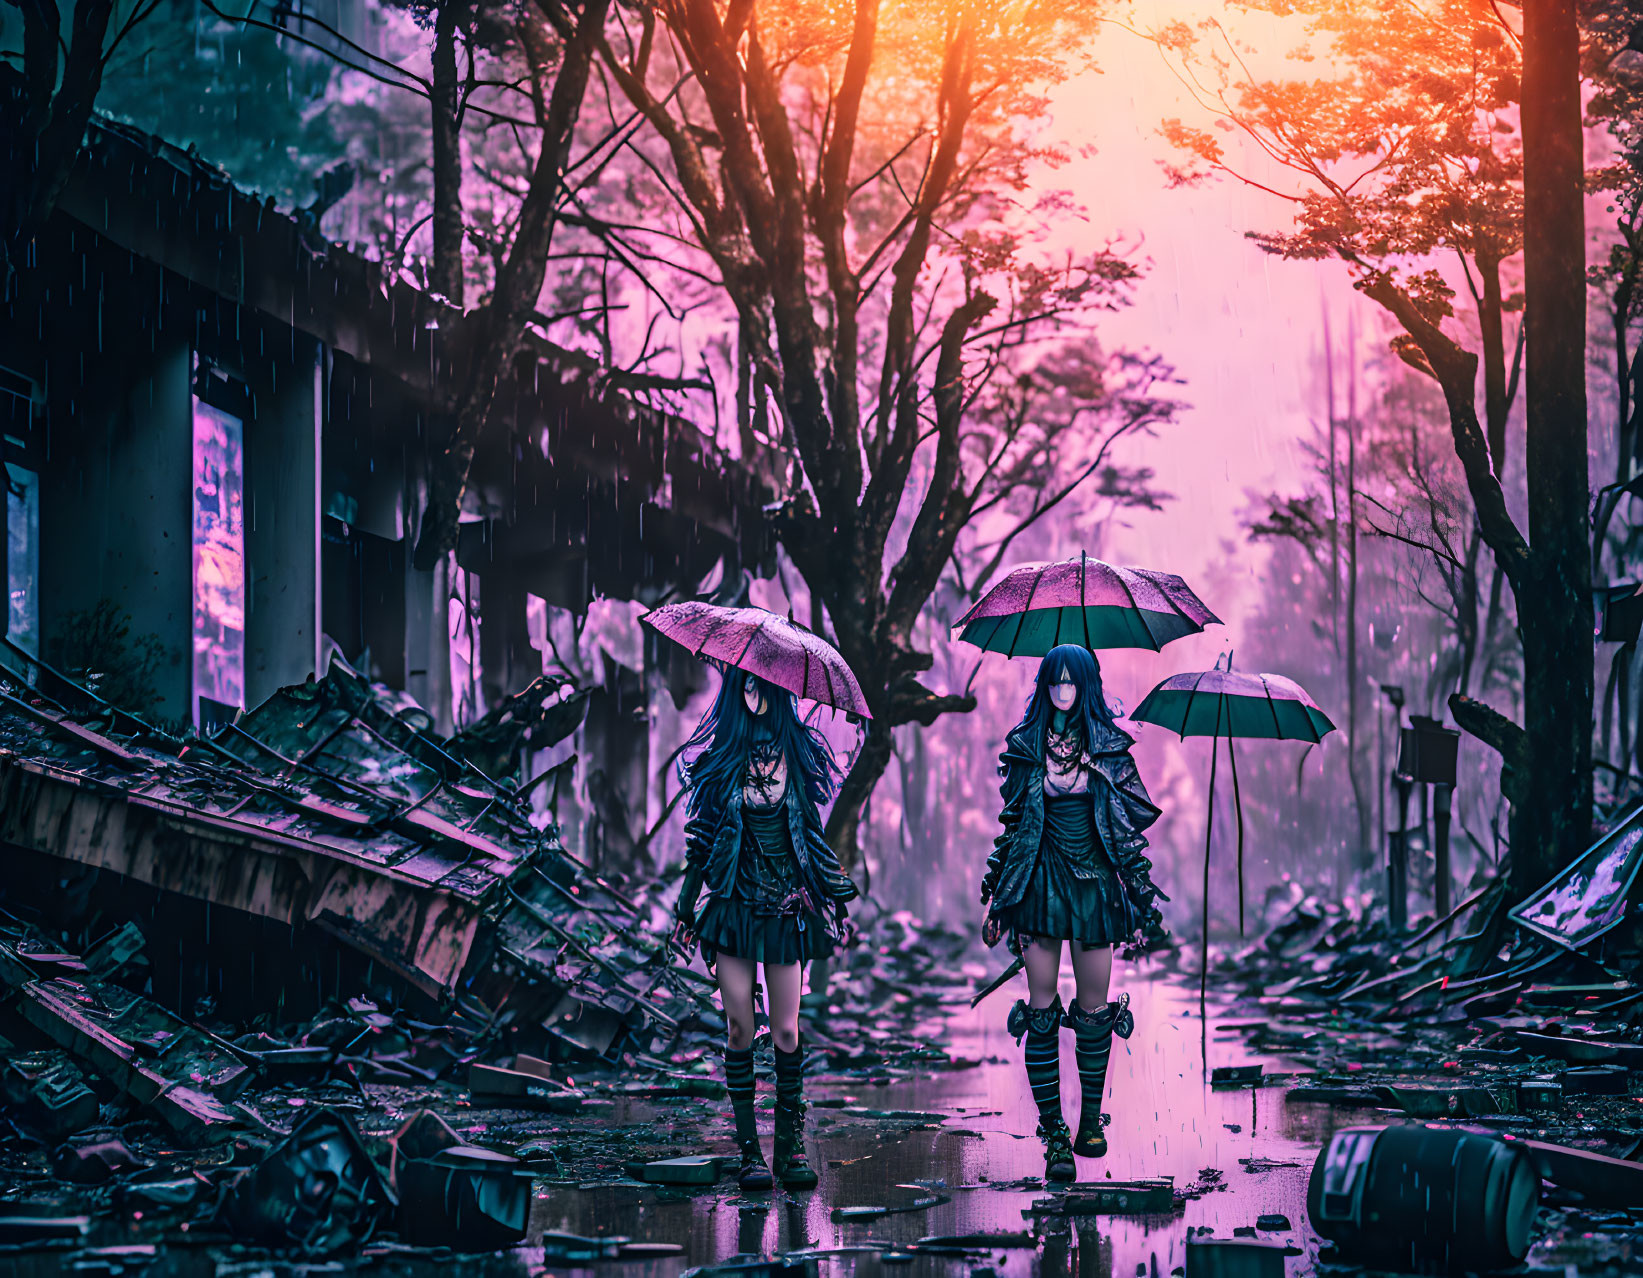 Two people with umbrellas in surreal purple environment.